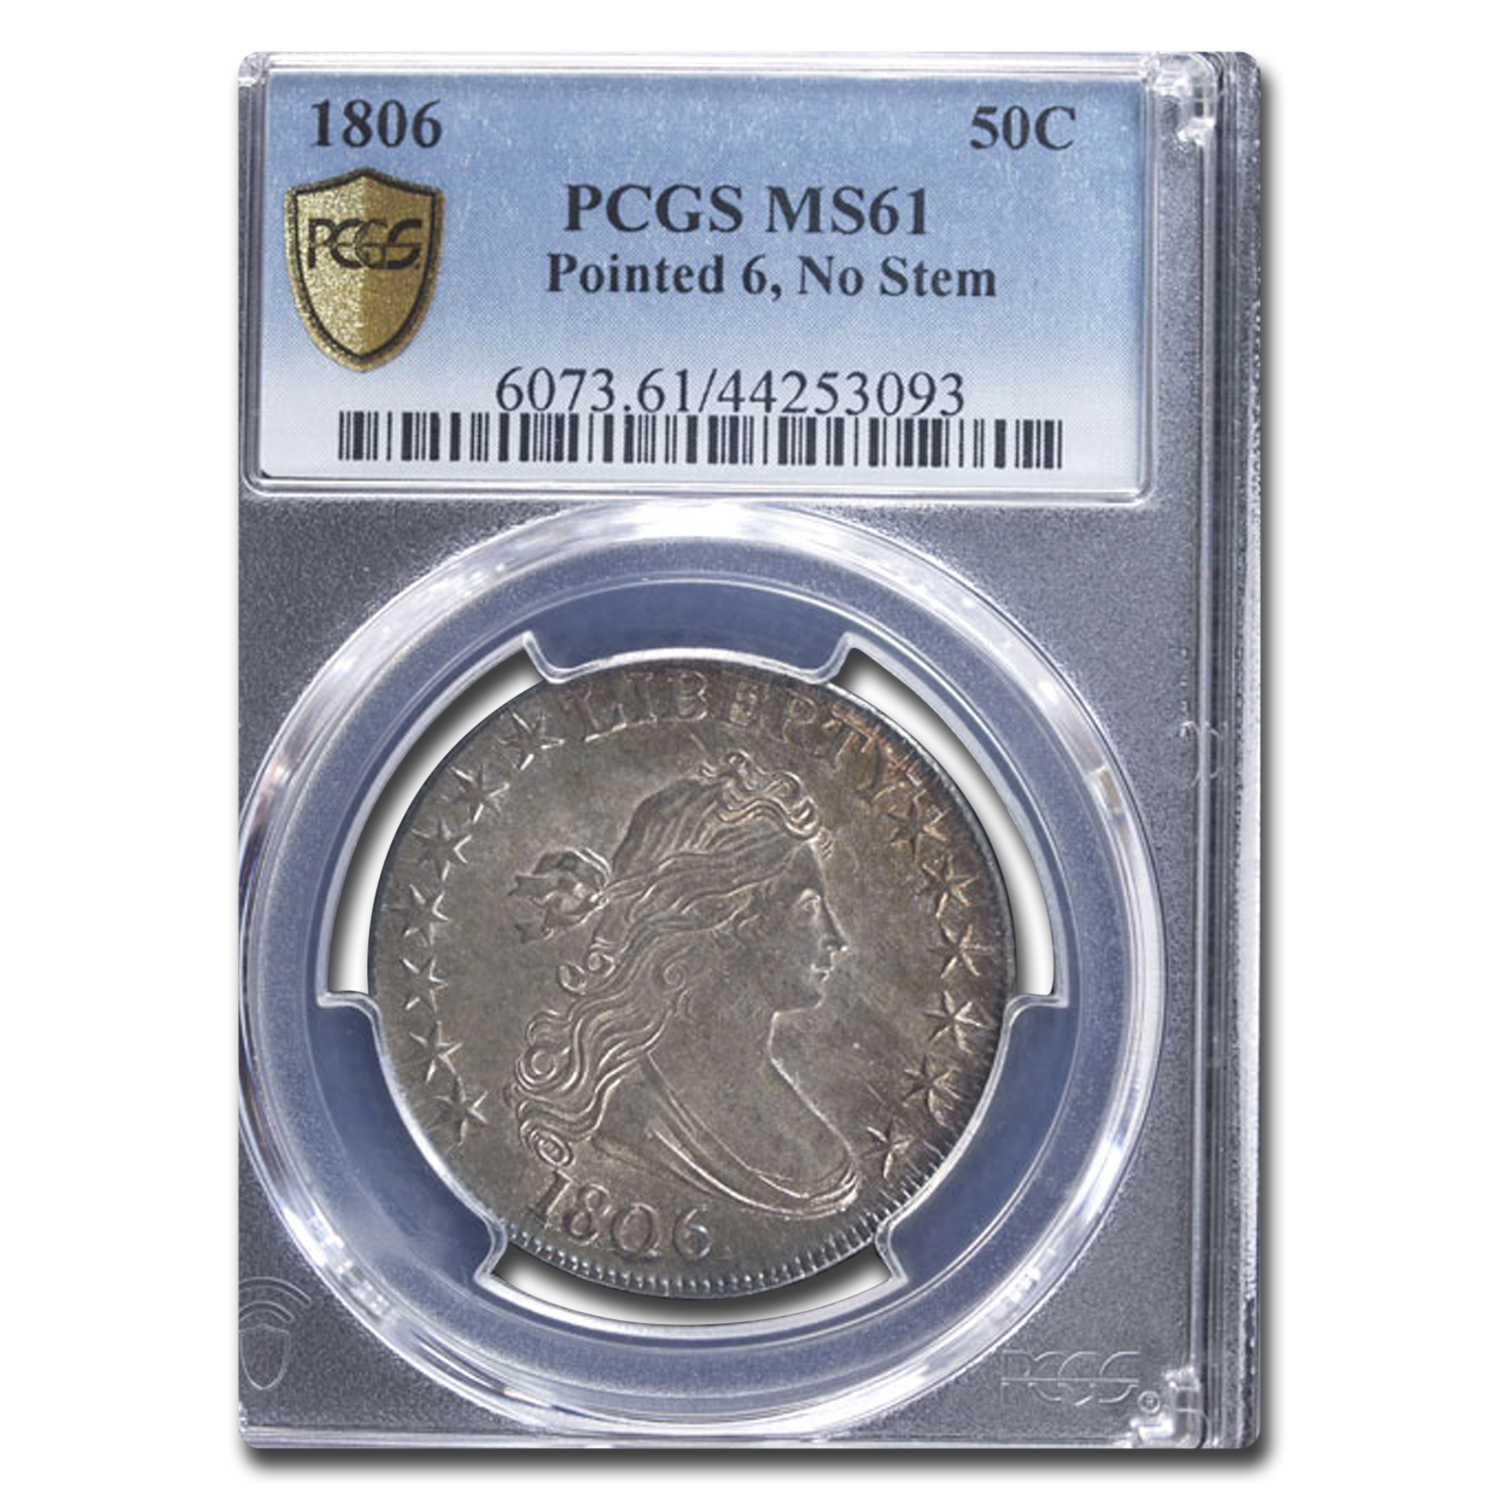 Buy 1806 Draped Bust Half Dollar MS-61 PCGS (Pointed 6, No Stem) - Click Image to Close